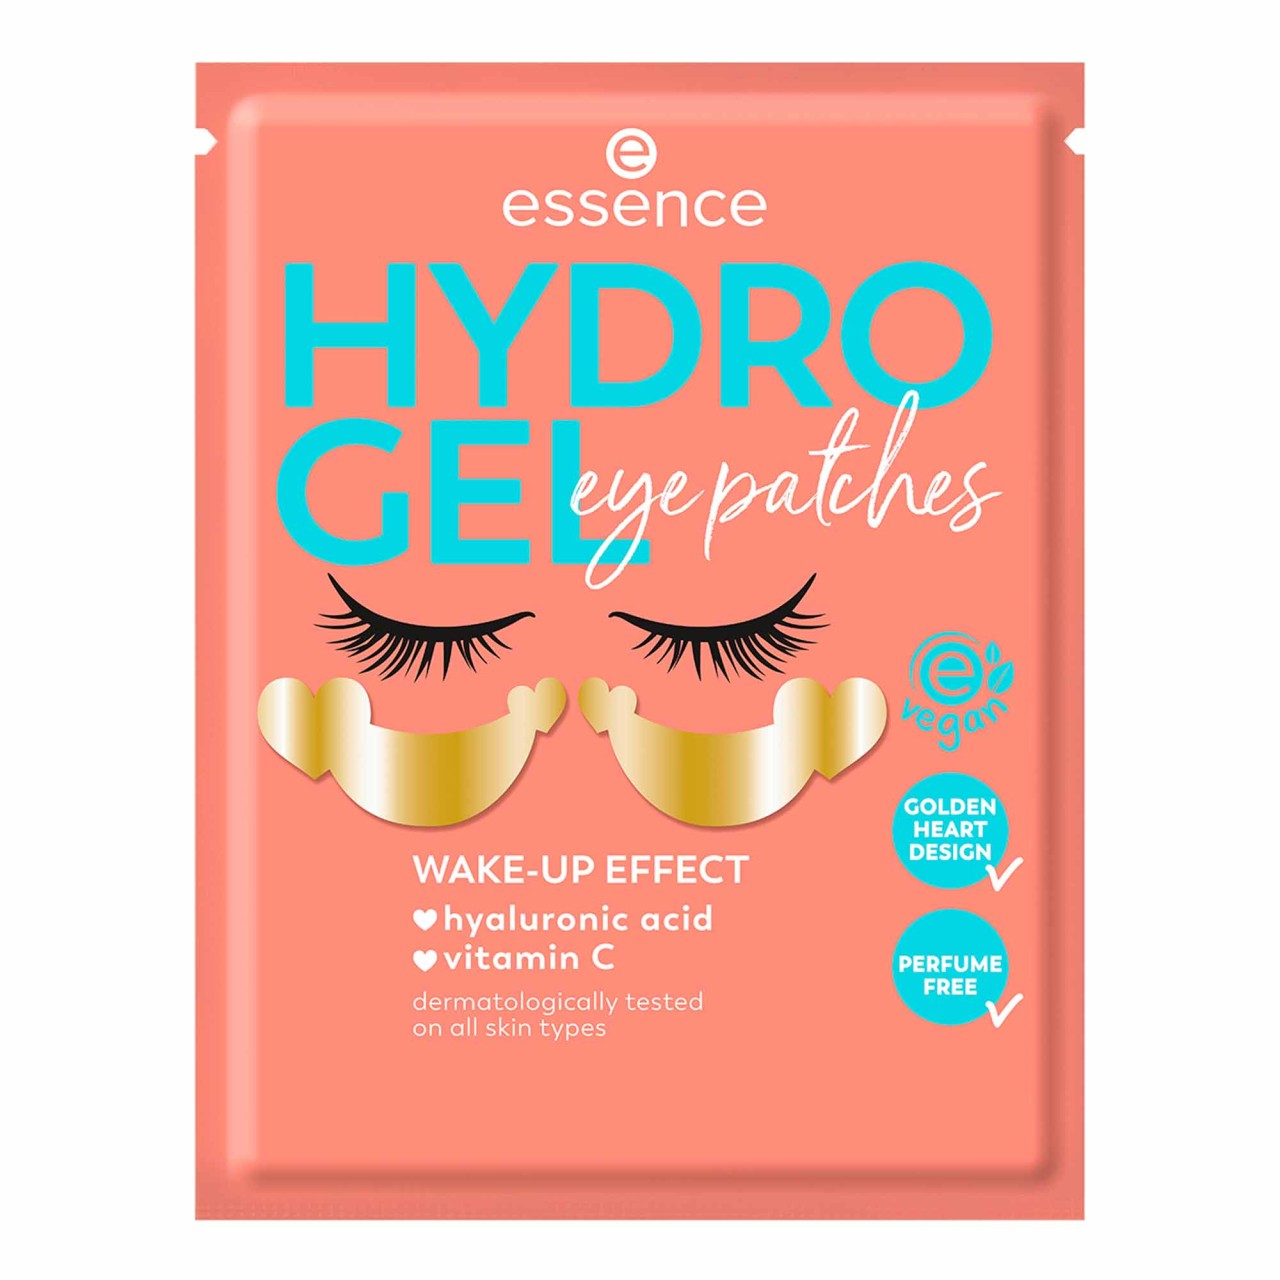 ESSENCE - Hydro Gel Eye Patches Wake Up Call - 